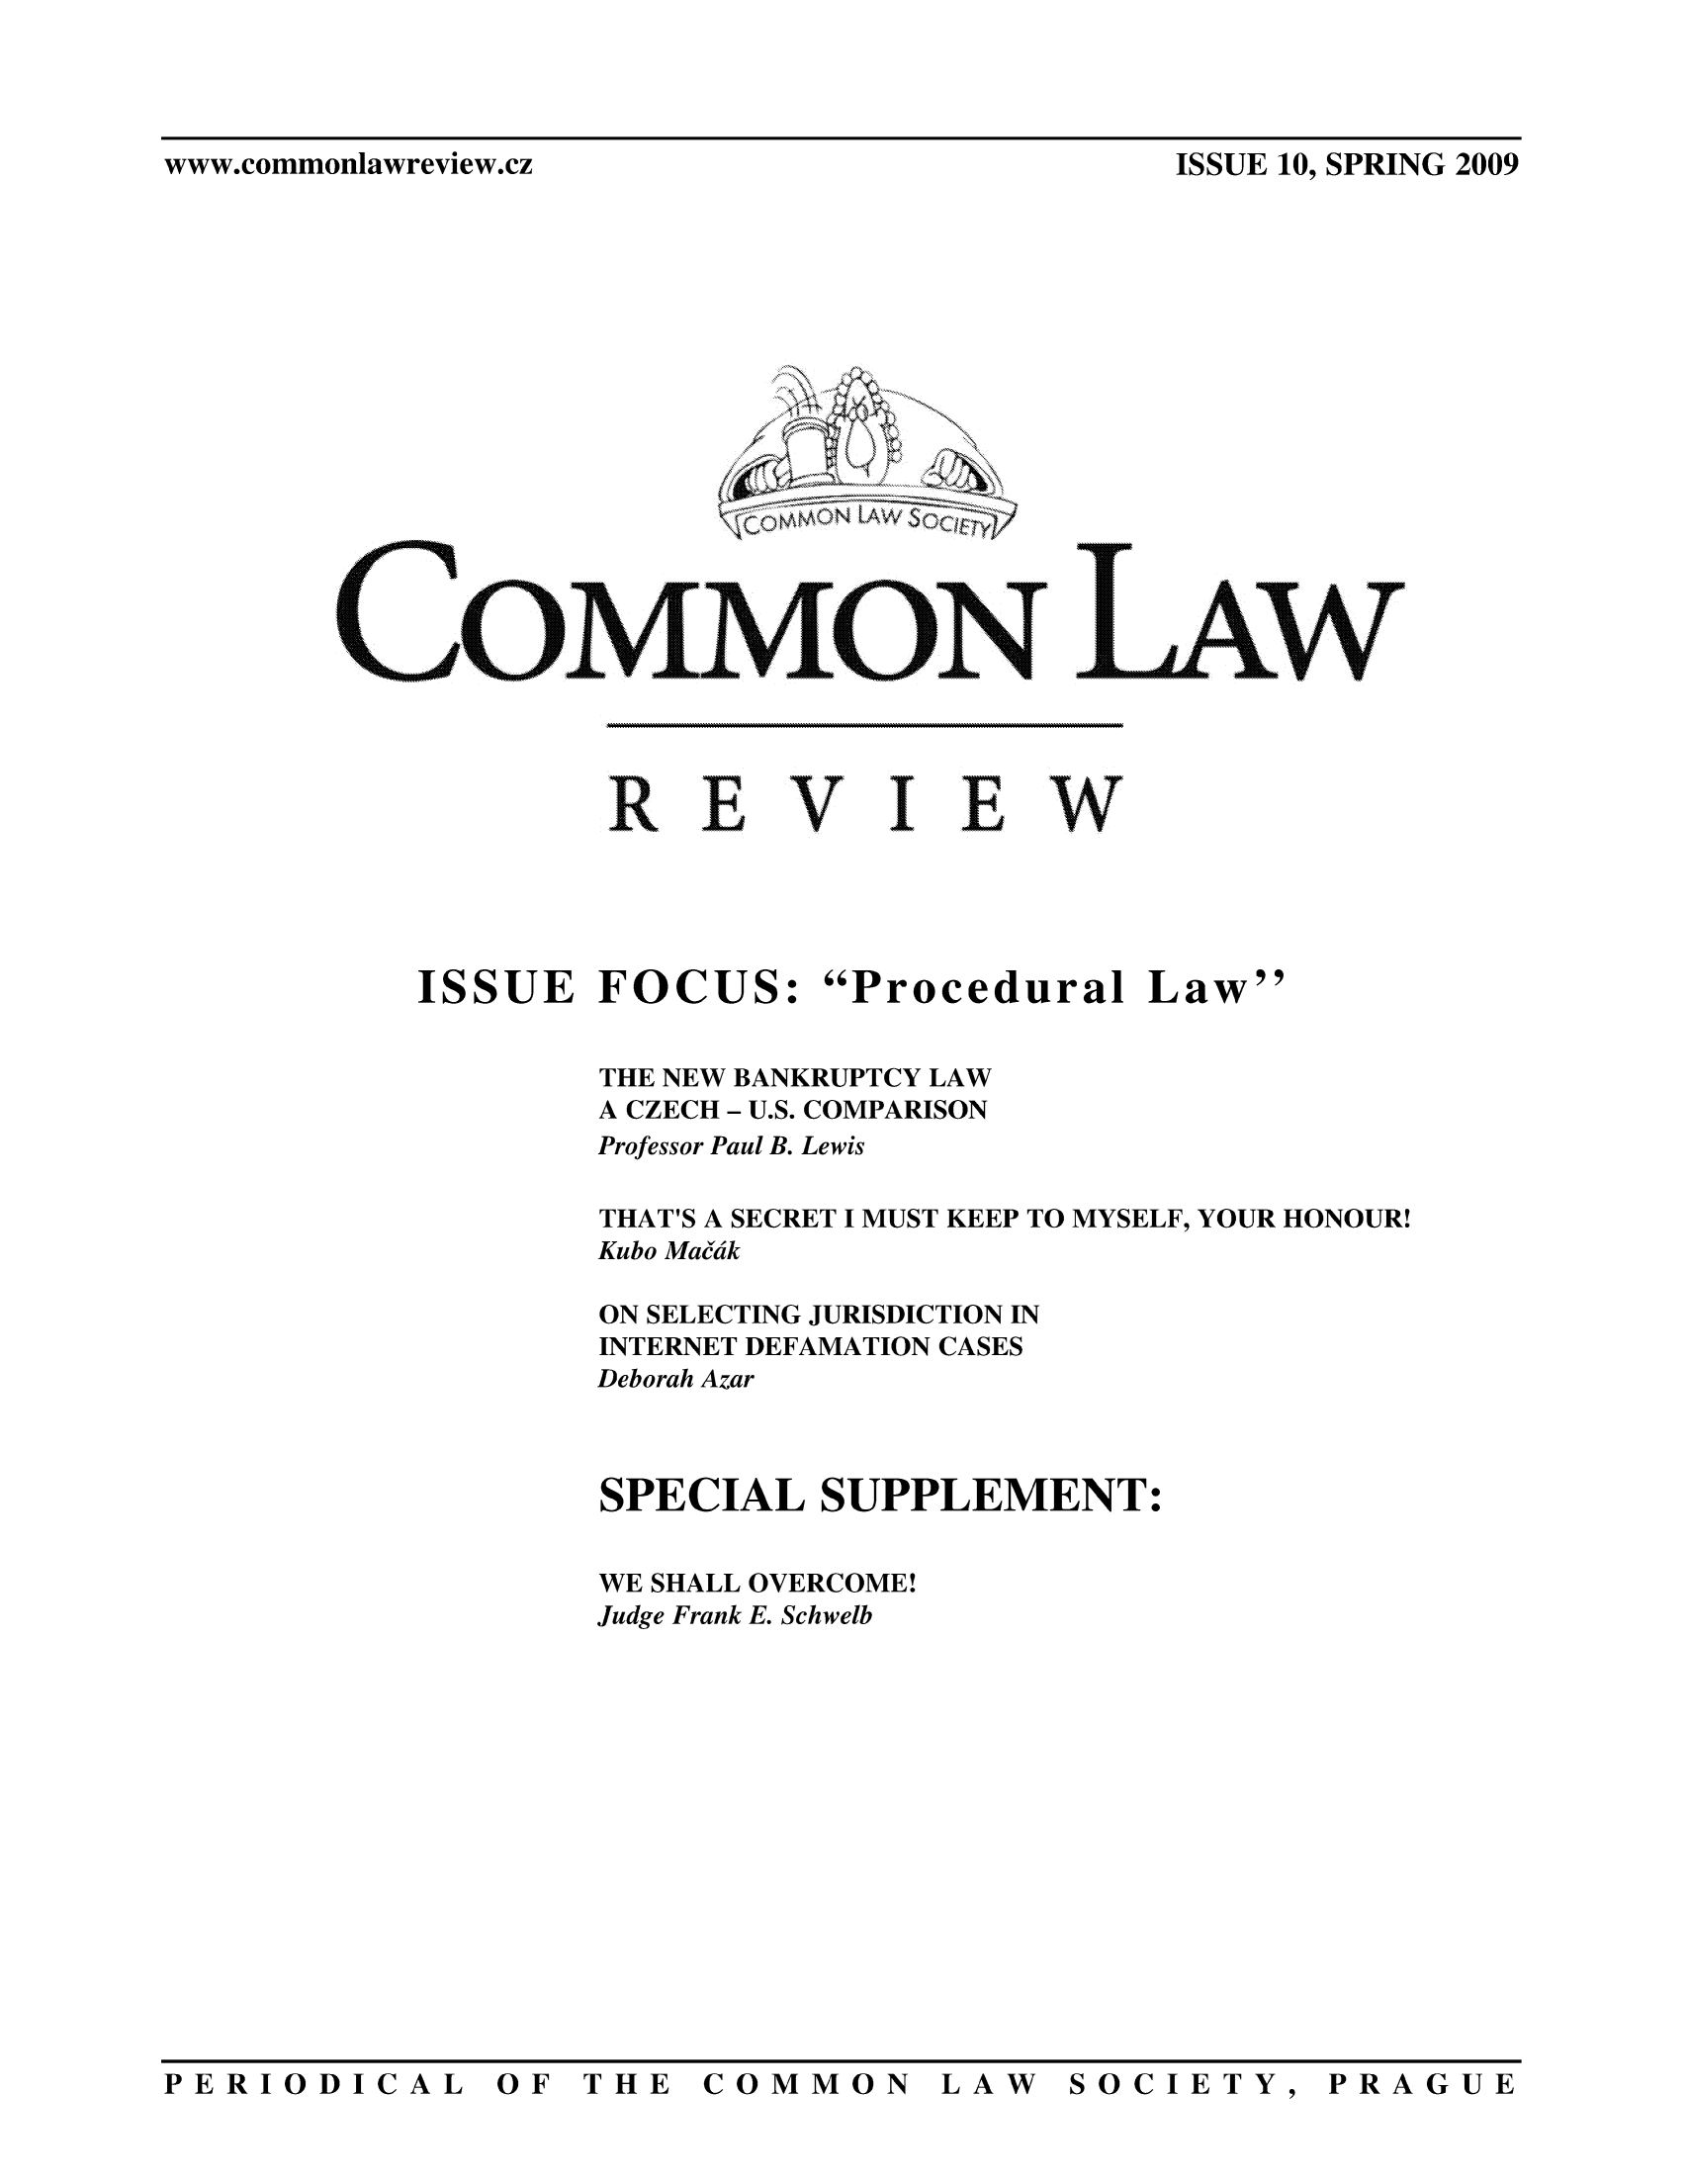 handle is hein.journals/comnlrevi10 and id is 1 raw text is: www.commonlawreview.cz                                            ISSUE 10, SPRING 2009wEVI EWISSUE FOCUS: Procedural LawTHE NEW BANKRUPTCY LAWA CZECH - U.S. COMPARISONProfessor Paul B. LewisTHAT'S A SECRET I MUST KEEP TO MYSELF, YOUR HONOUR!Kubo MaffdkON SELECTING JURISDICTION ININTERNET DEFAMATION CASESDeborah AzarSPECIAL SUPPLEMENT:WE SHALL OVERCOME!Judge Frank E. SchwelbPERIODICAL OF THE COMMON LAW SOCIETY, PRAGUEwww.commonlawreview.czISSUE 10, SPRING 20091c)  O